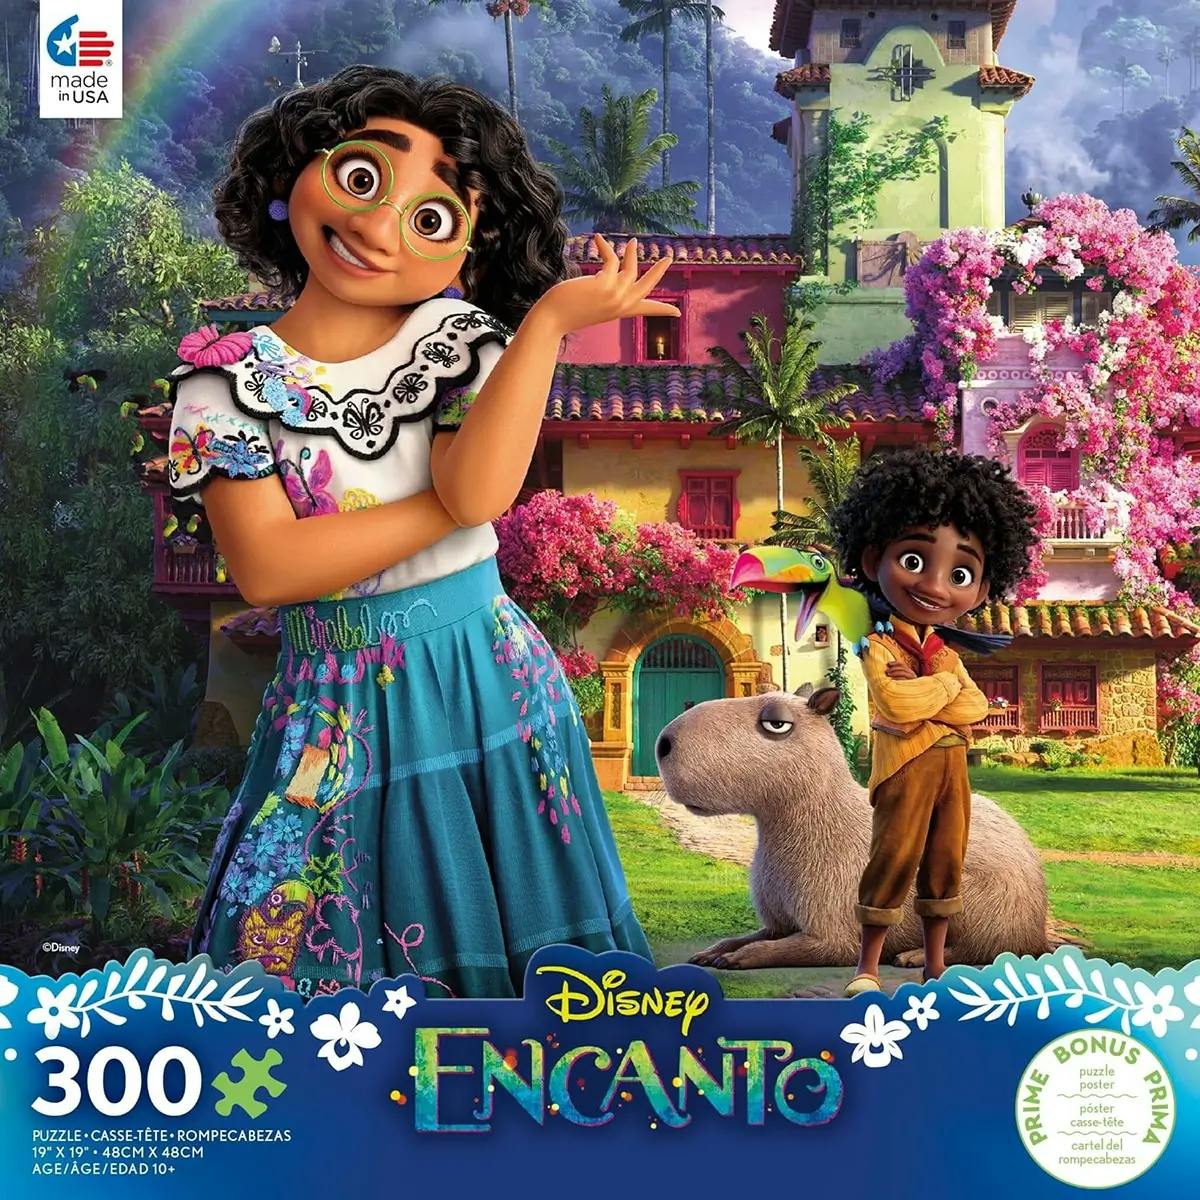 Cover of a 300-piece jigsaw puzzle box, showing a scene from the Disney movie Encanto.